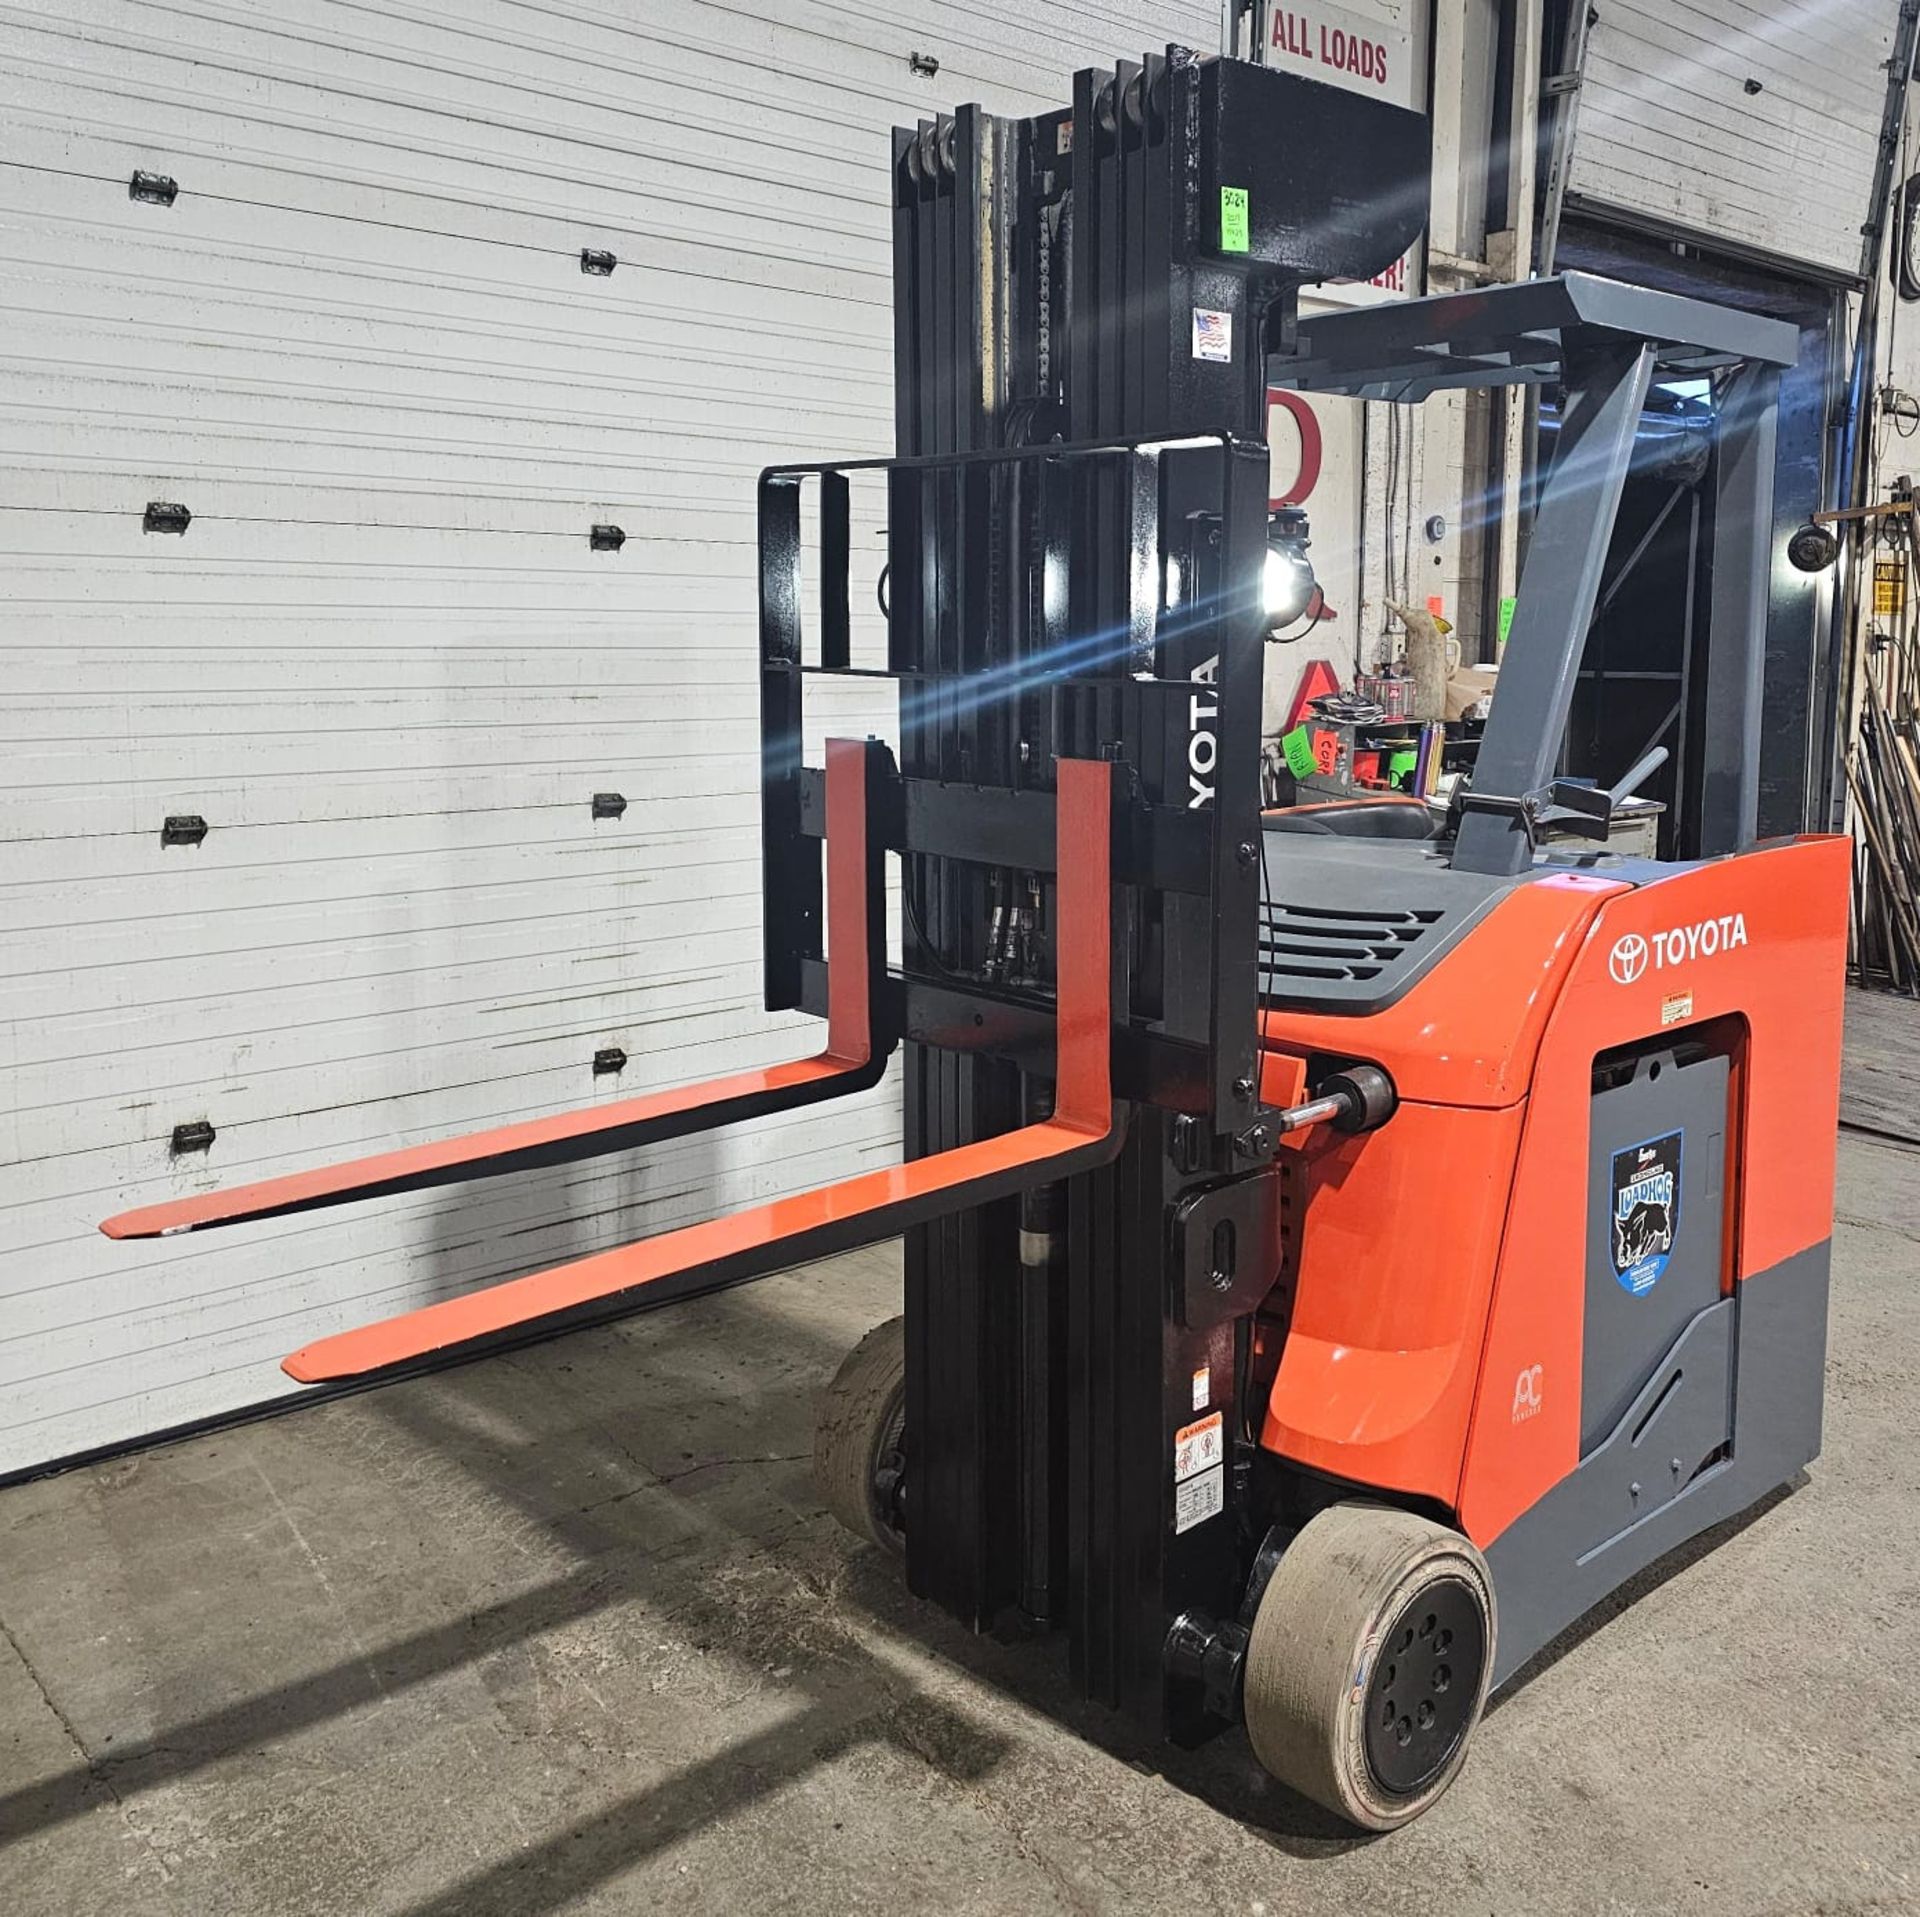 2017 Toyota 4,000lbsCapacity Forklift Electric 36V 15923 with sideshift & 4-STAGE MAST 276" load - Image 6 of 8